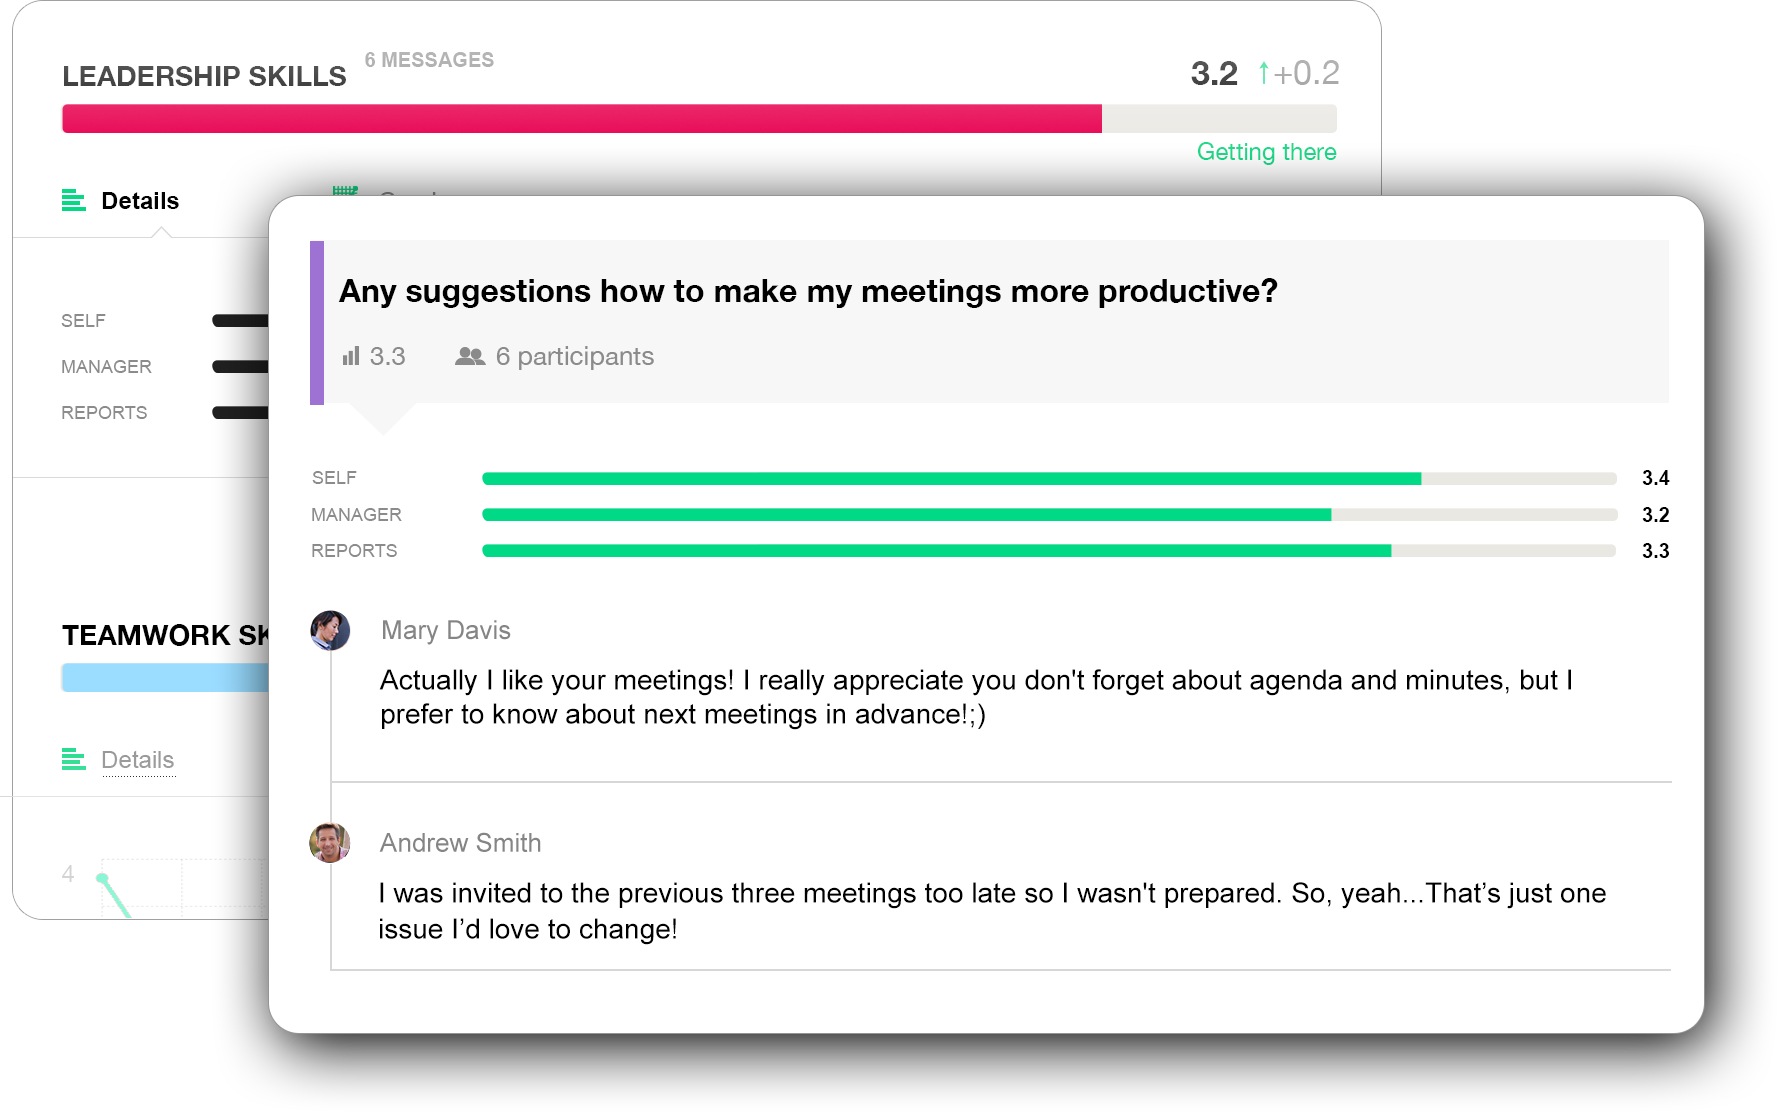 Real-time feedback between colleagues